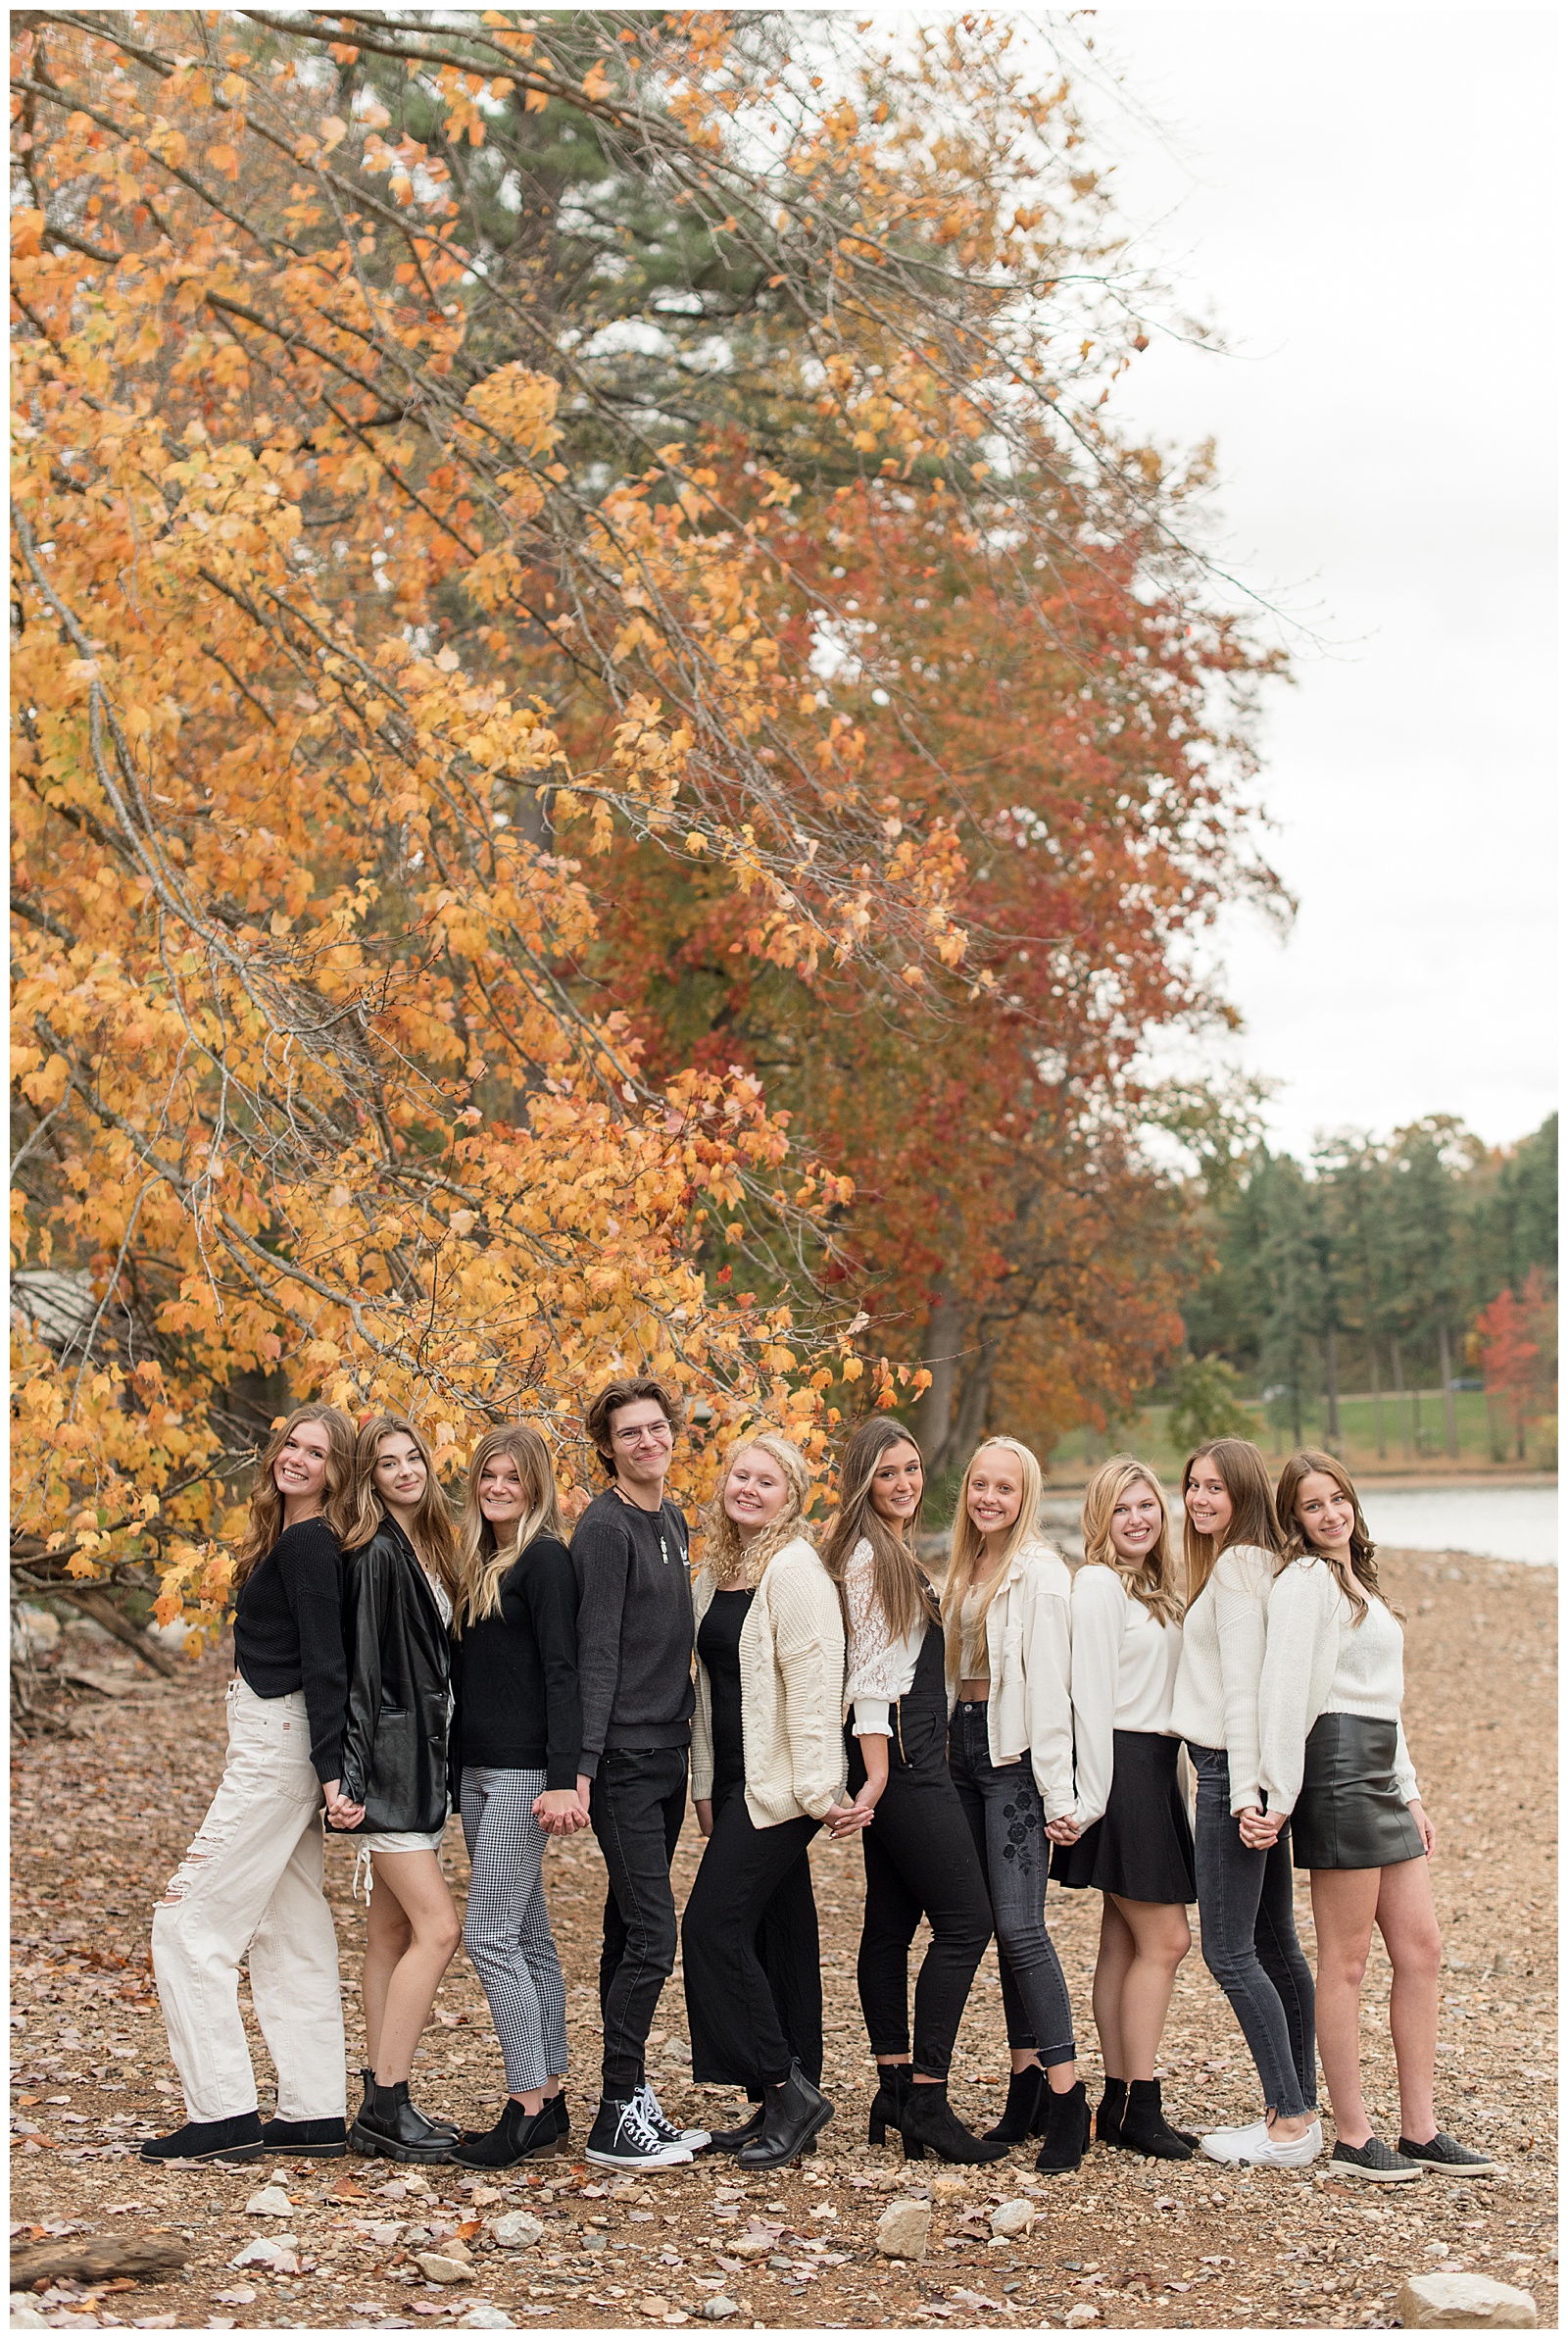 senior spokesmodels standing close together with their backs against one another with fall tree behind them at reservoir park